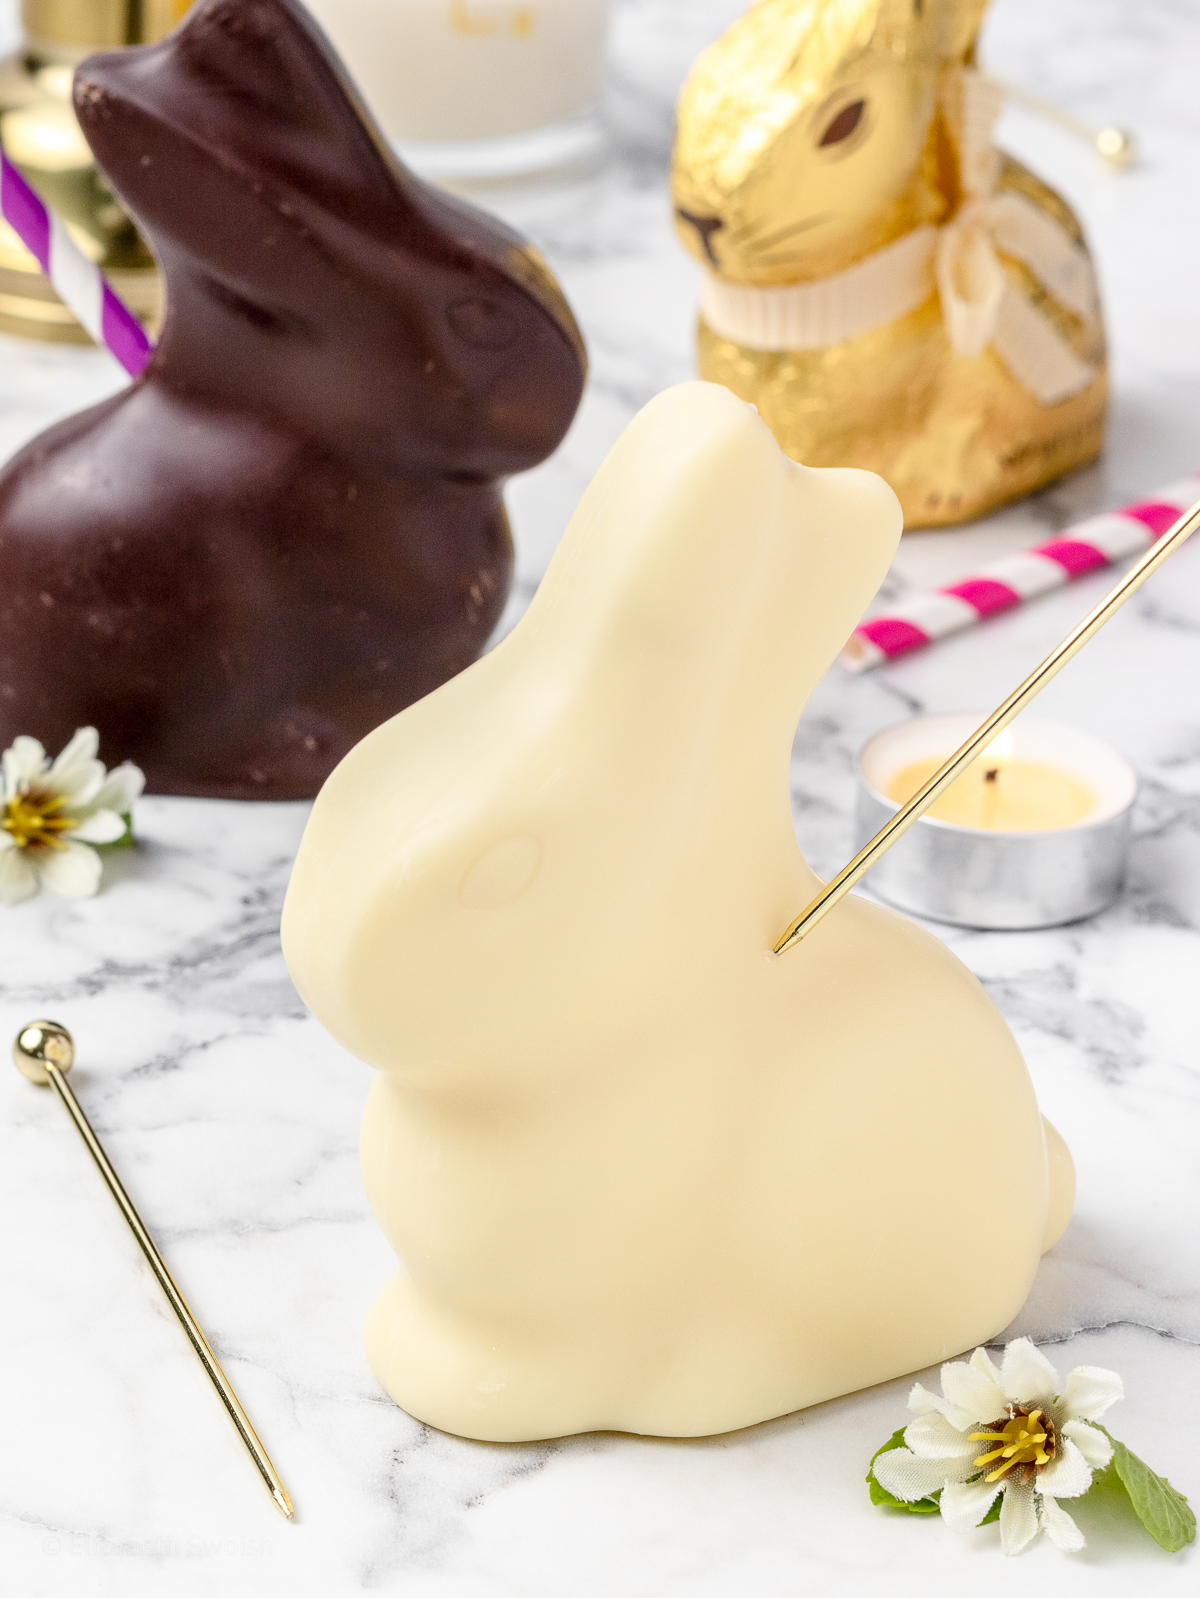 1. Using a small, sharp, metal object to pierce the chocolate bunny and carve out a hole for the small funnel and straw.